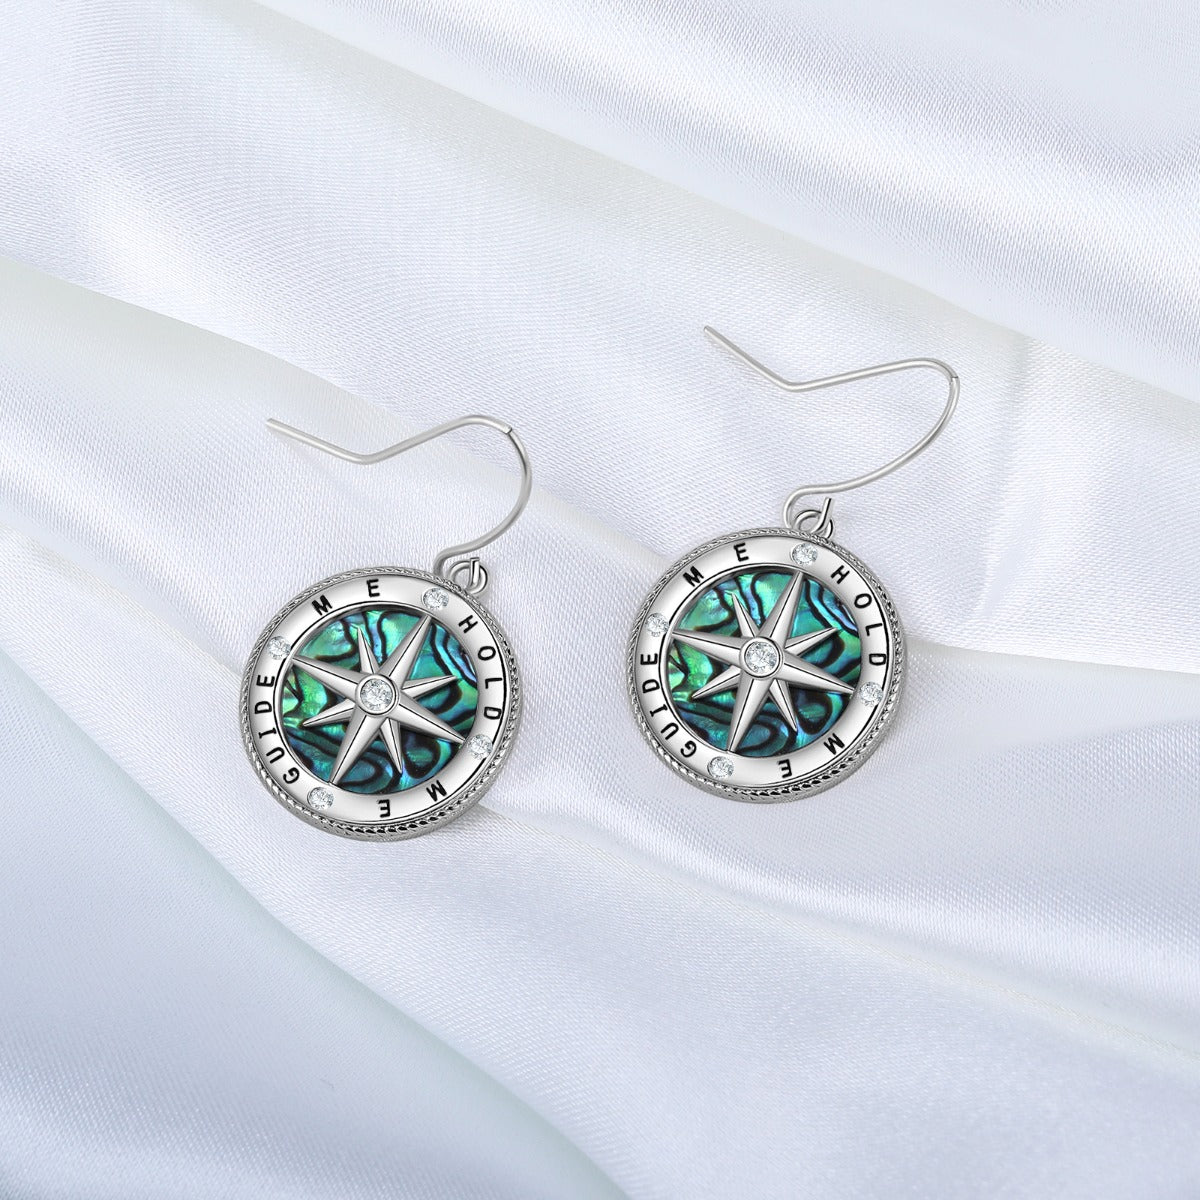 Rhodium Plated Compass Earrings